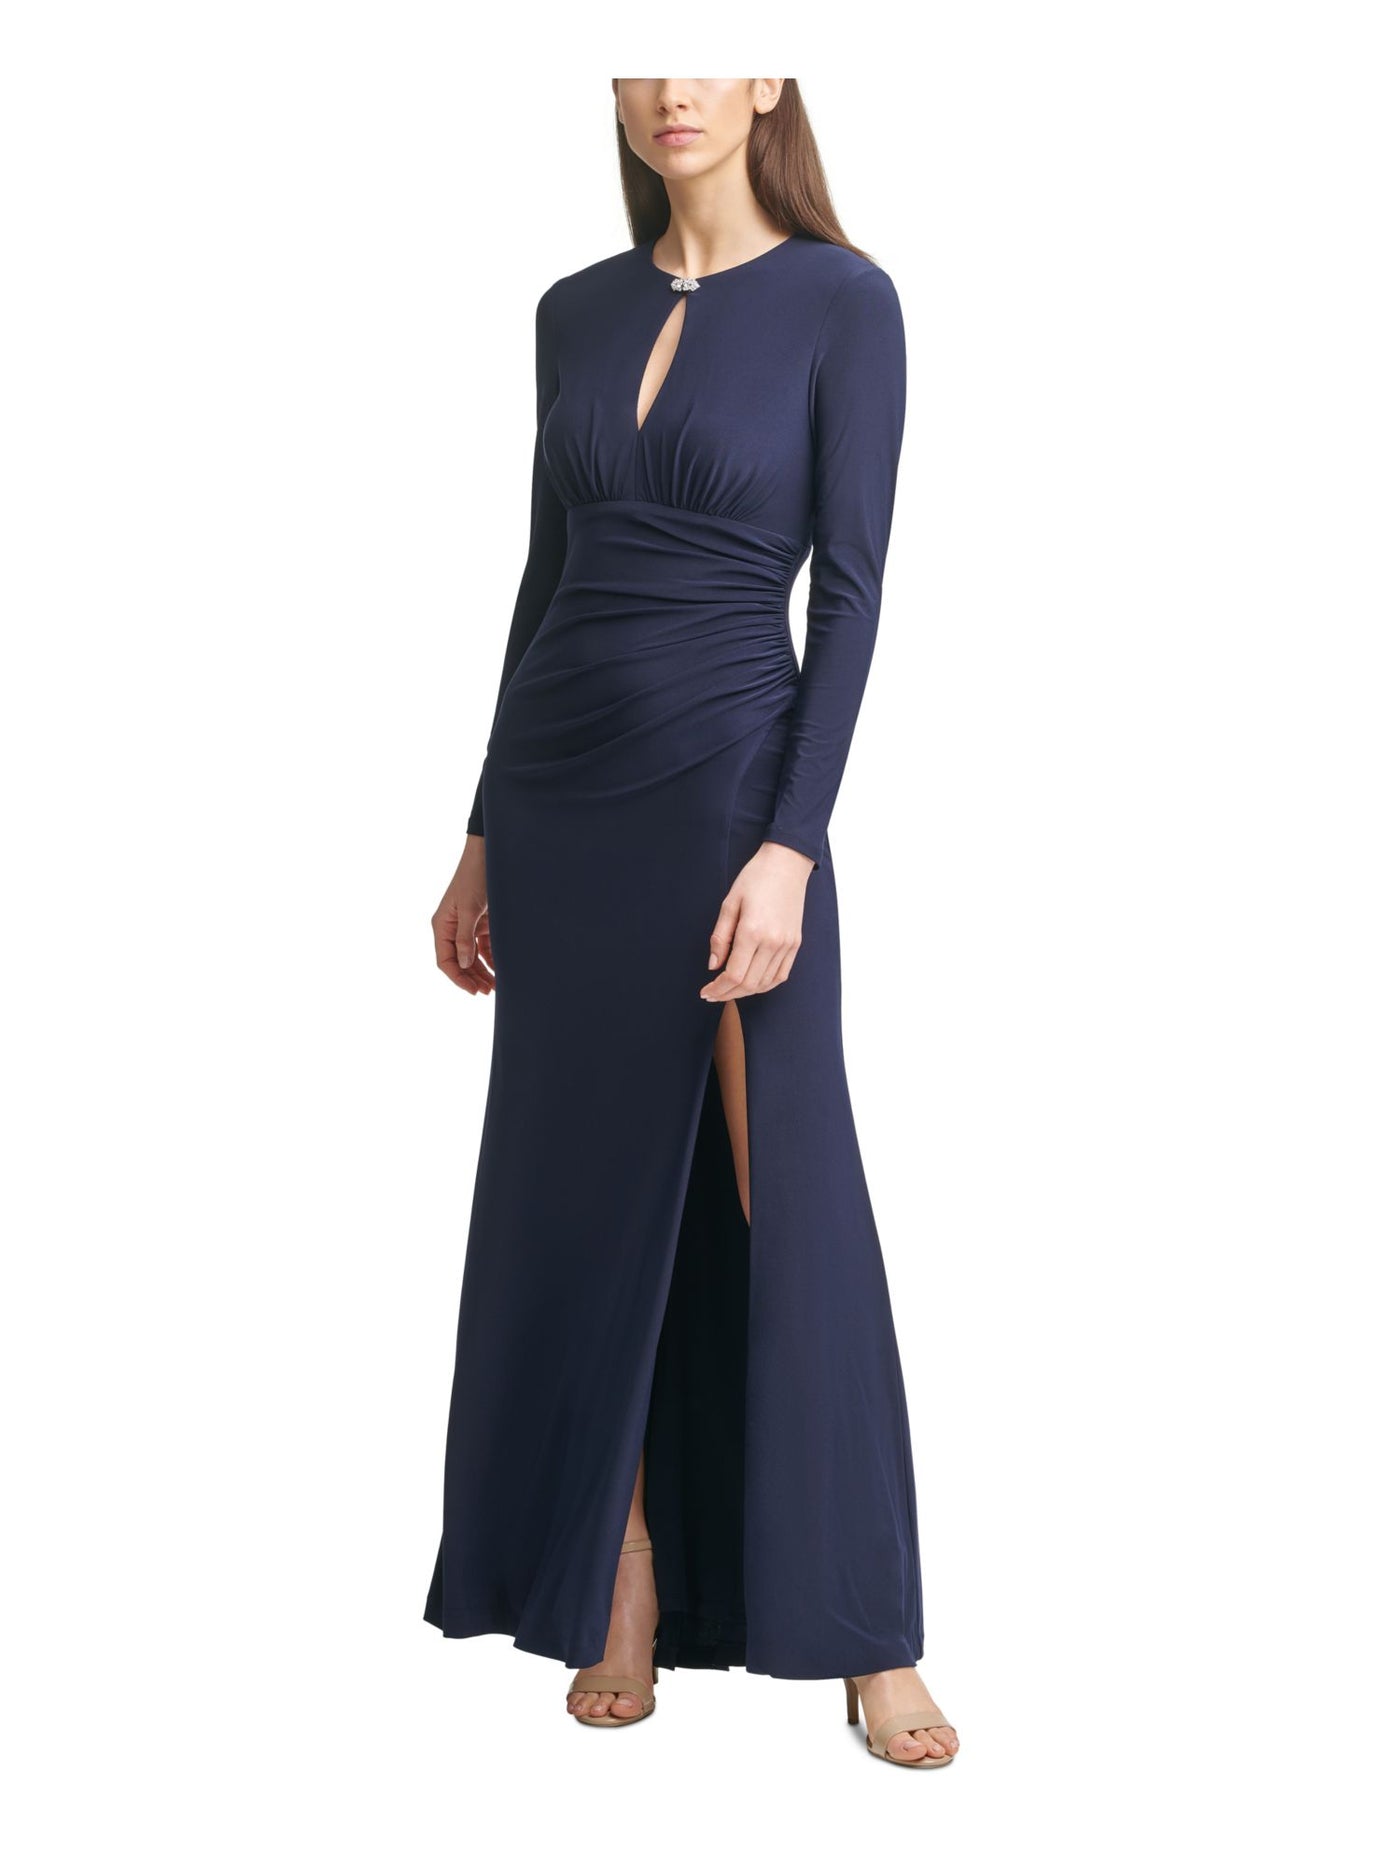 VINCE CAMUTO Womens Navy Stretch Embellished Zippered Slitted Ruched Long Sleeve Keyhole Full-Length Formal Gown Dress 4